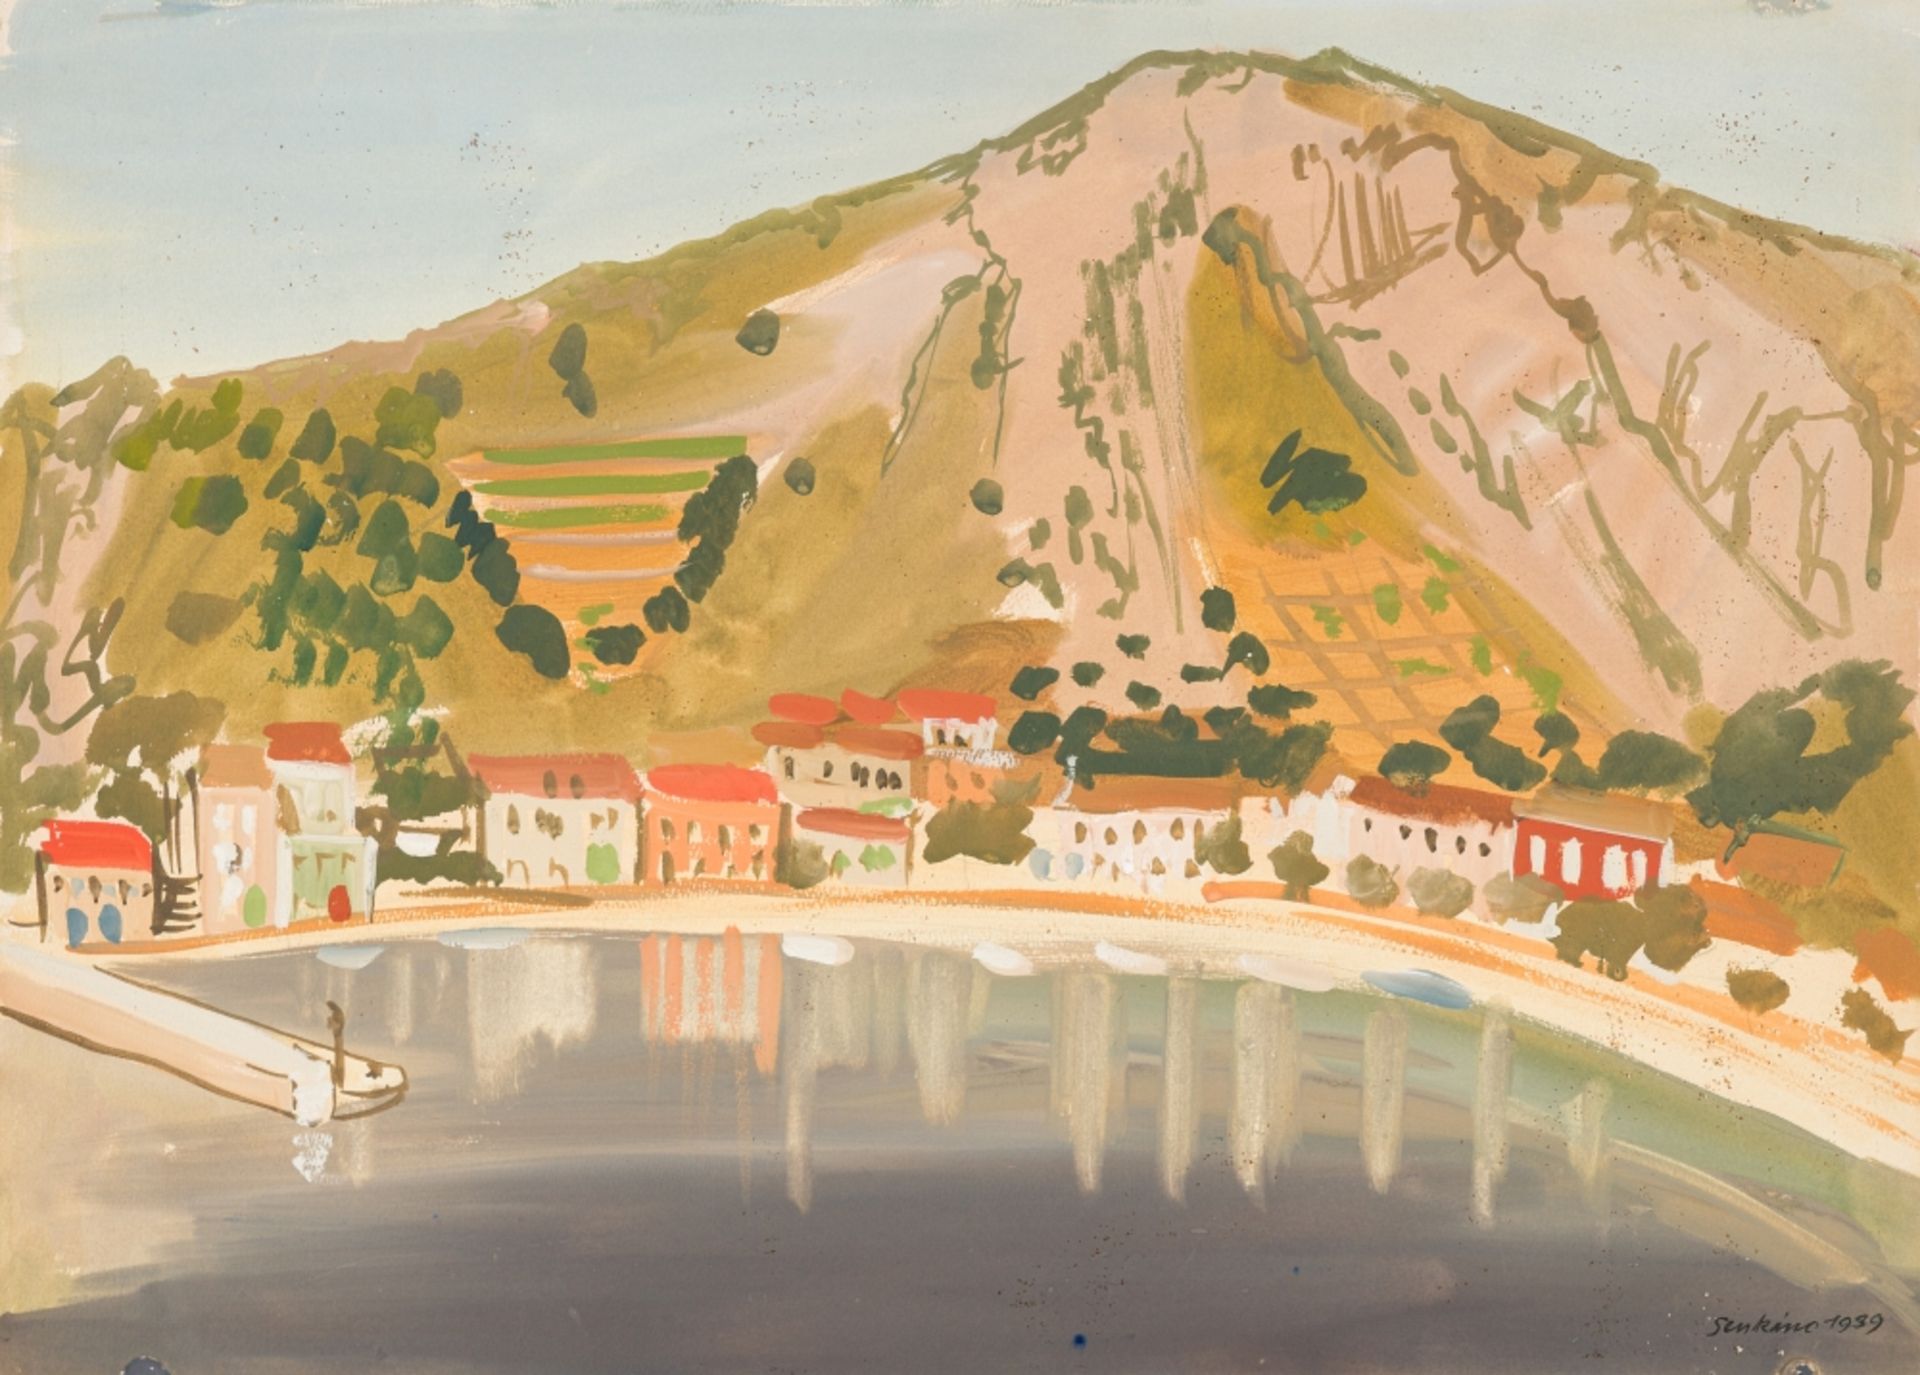 Senkinc, Franz(1902 - 1955)Trstenik, 1939Watercolor on PaperSigned and dated lower right as well